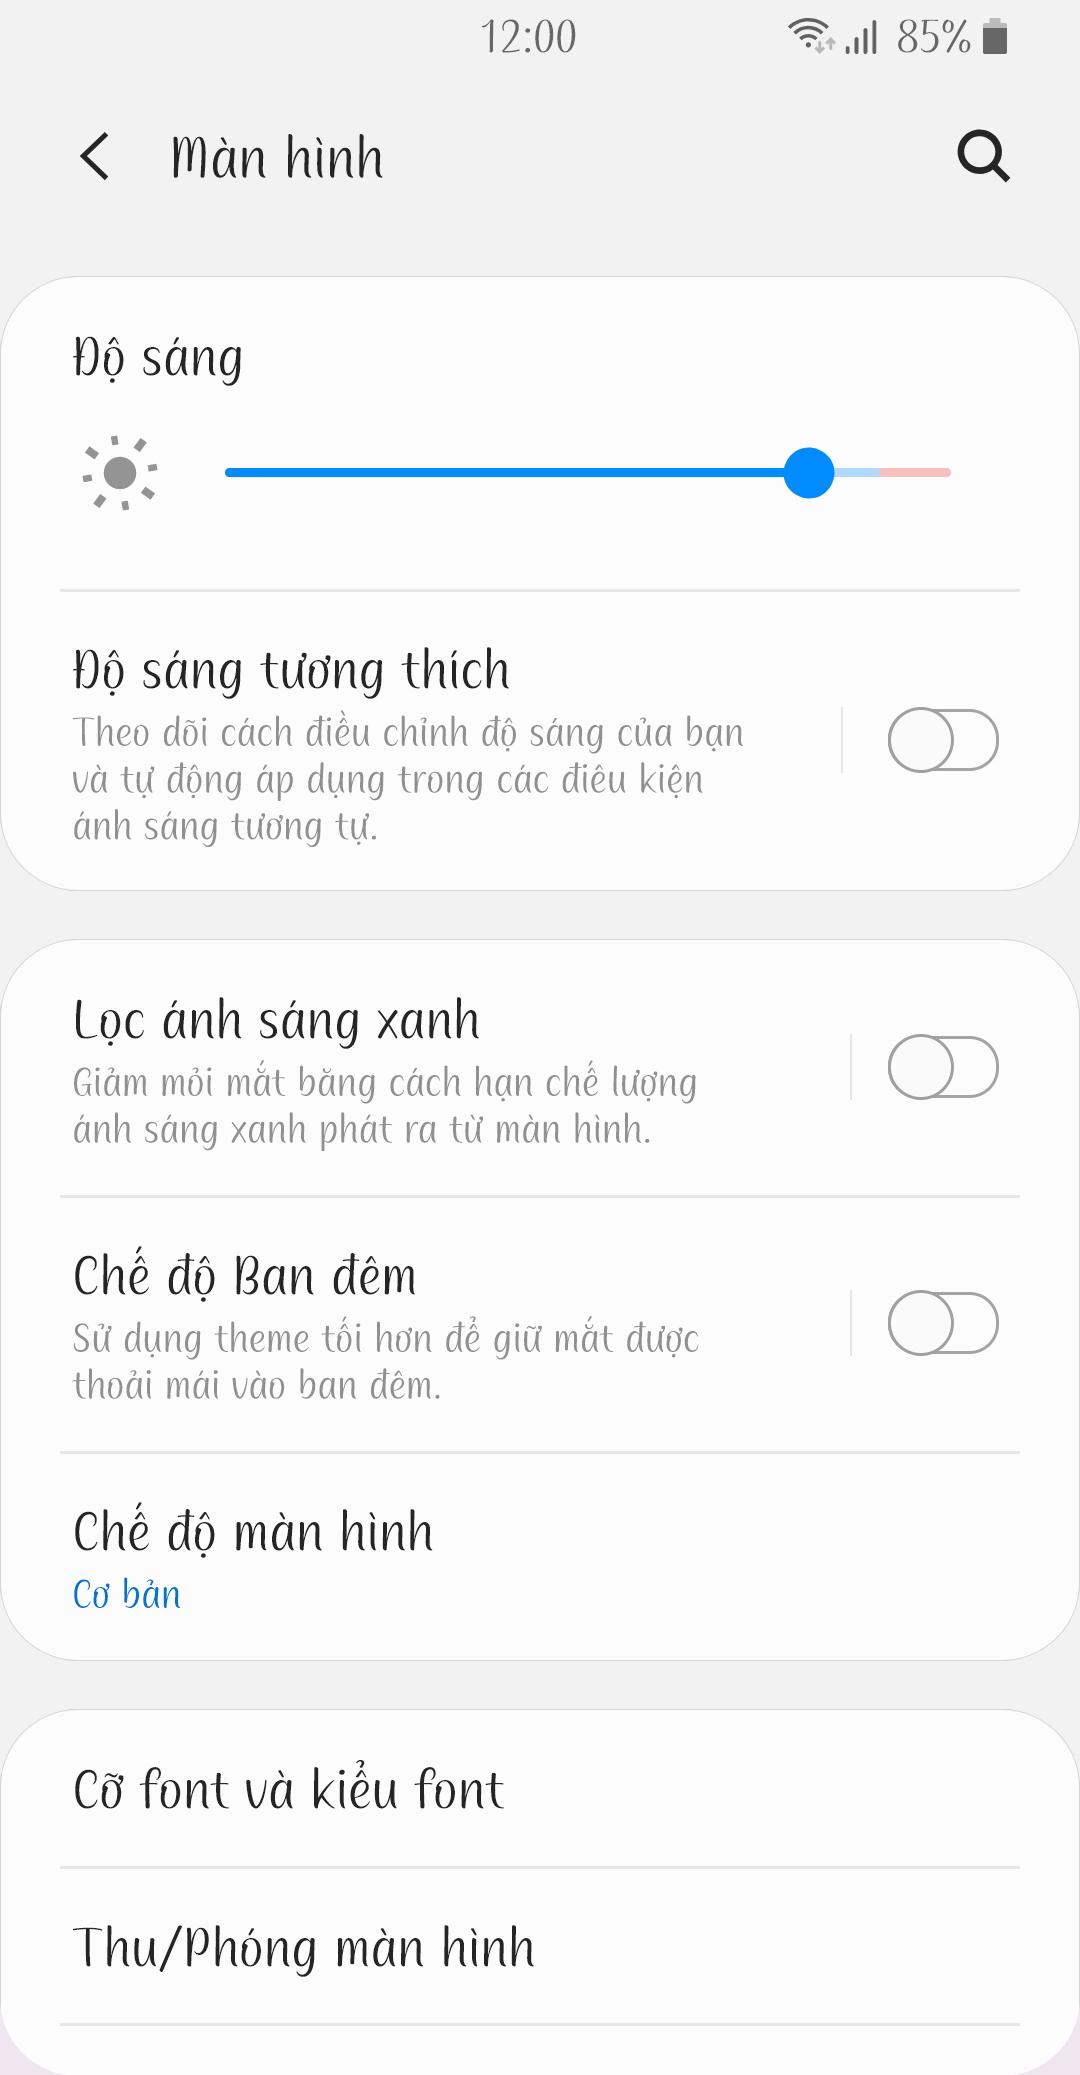 Zf Adagio™ Vietnamese Flipfont Latest Version 1.0 For Android